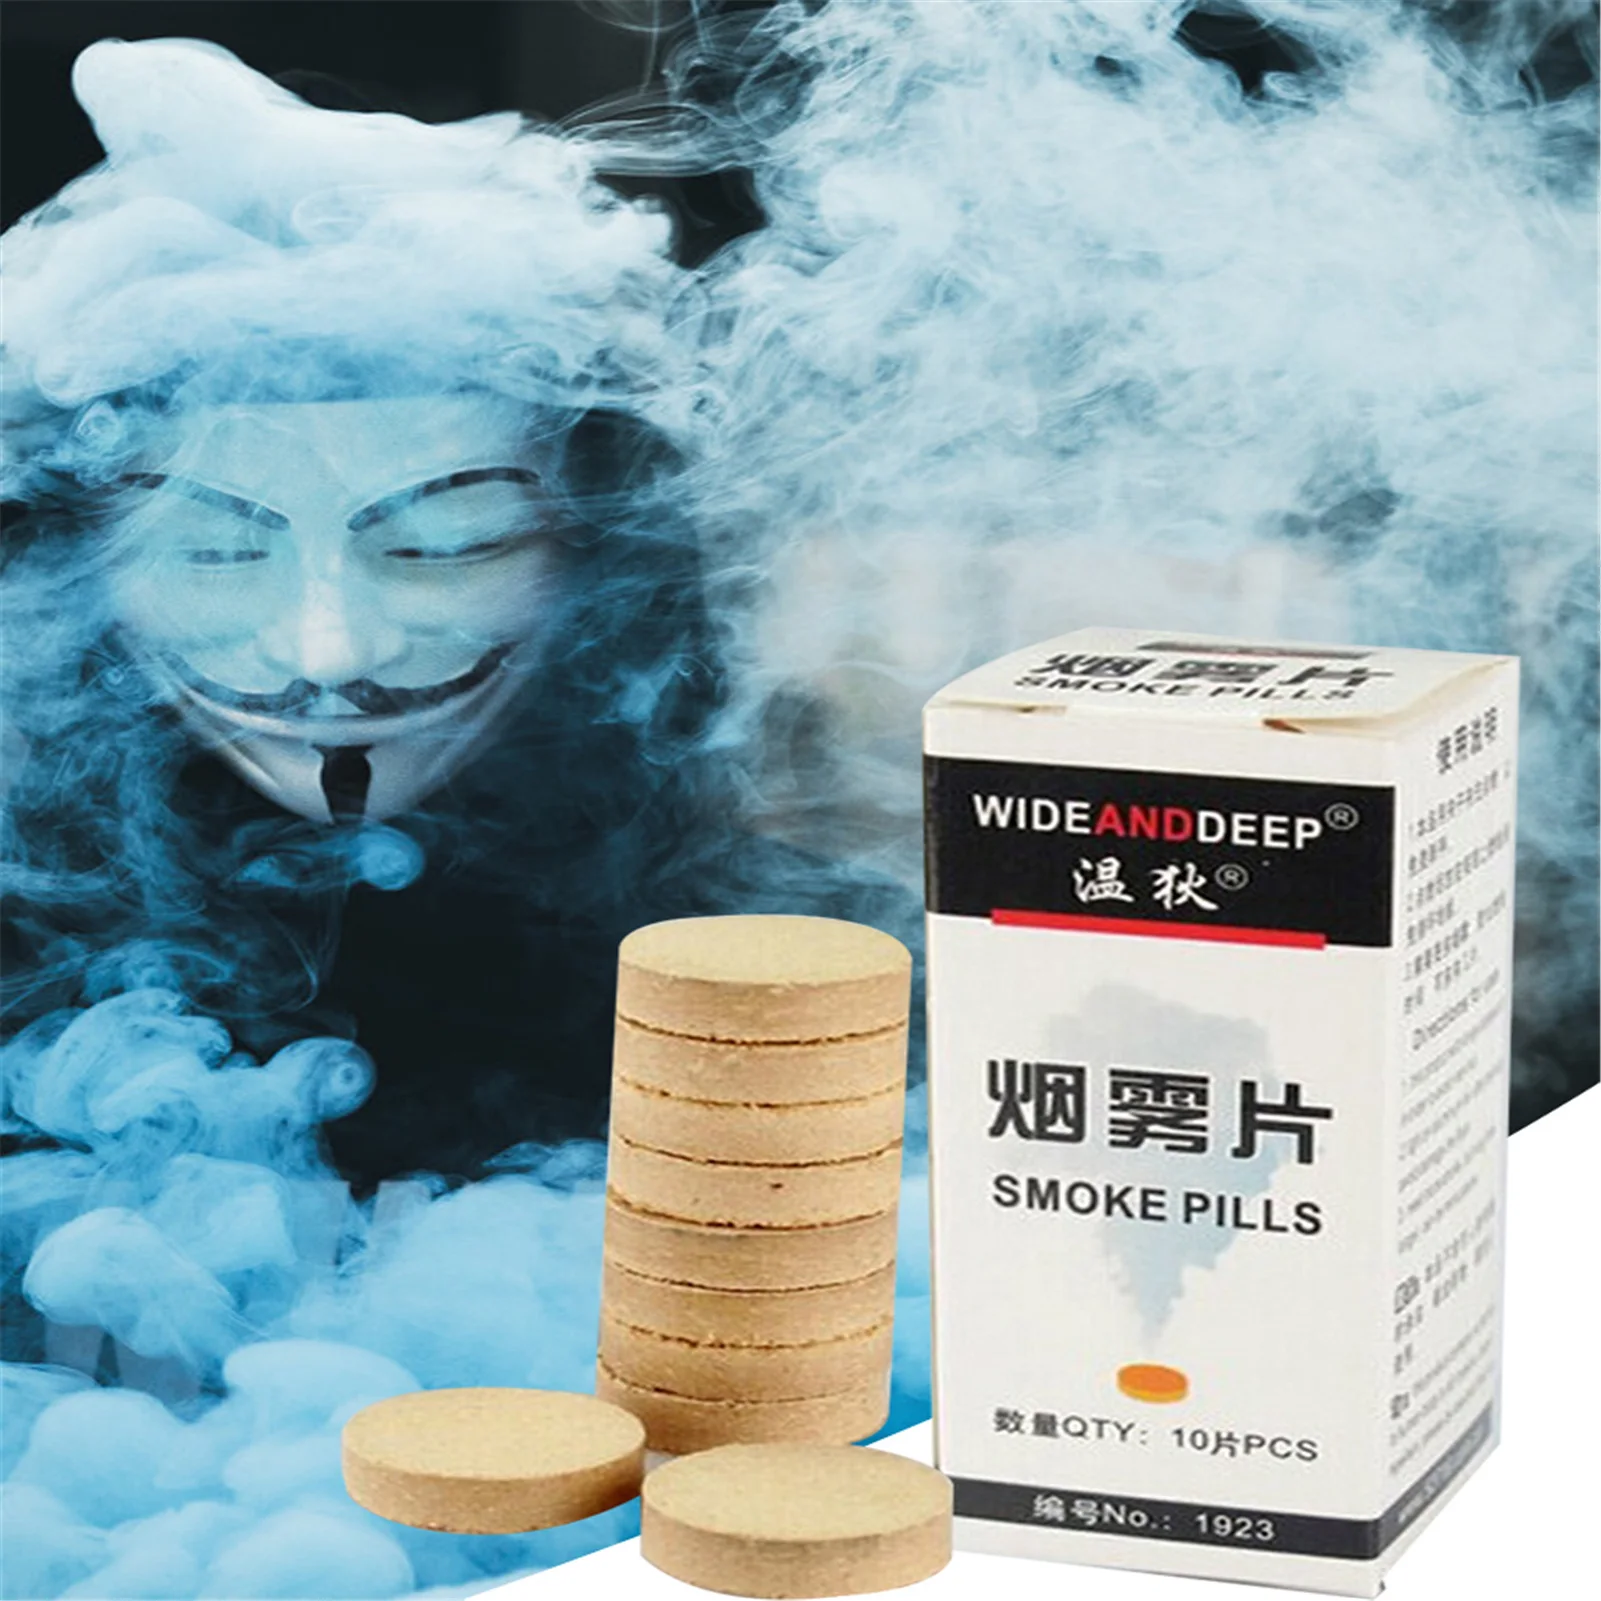 PcsBox White Smoke Cake Pills Show Divine Halloween Photography Aid Decoration Tool Props Round Party DIY Decor images - 6